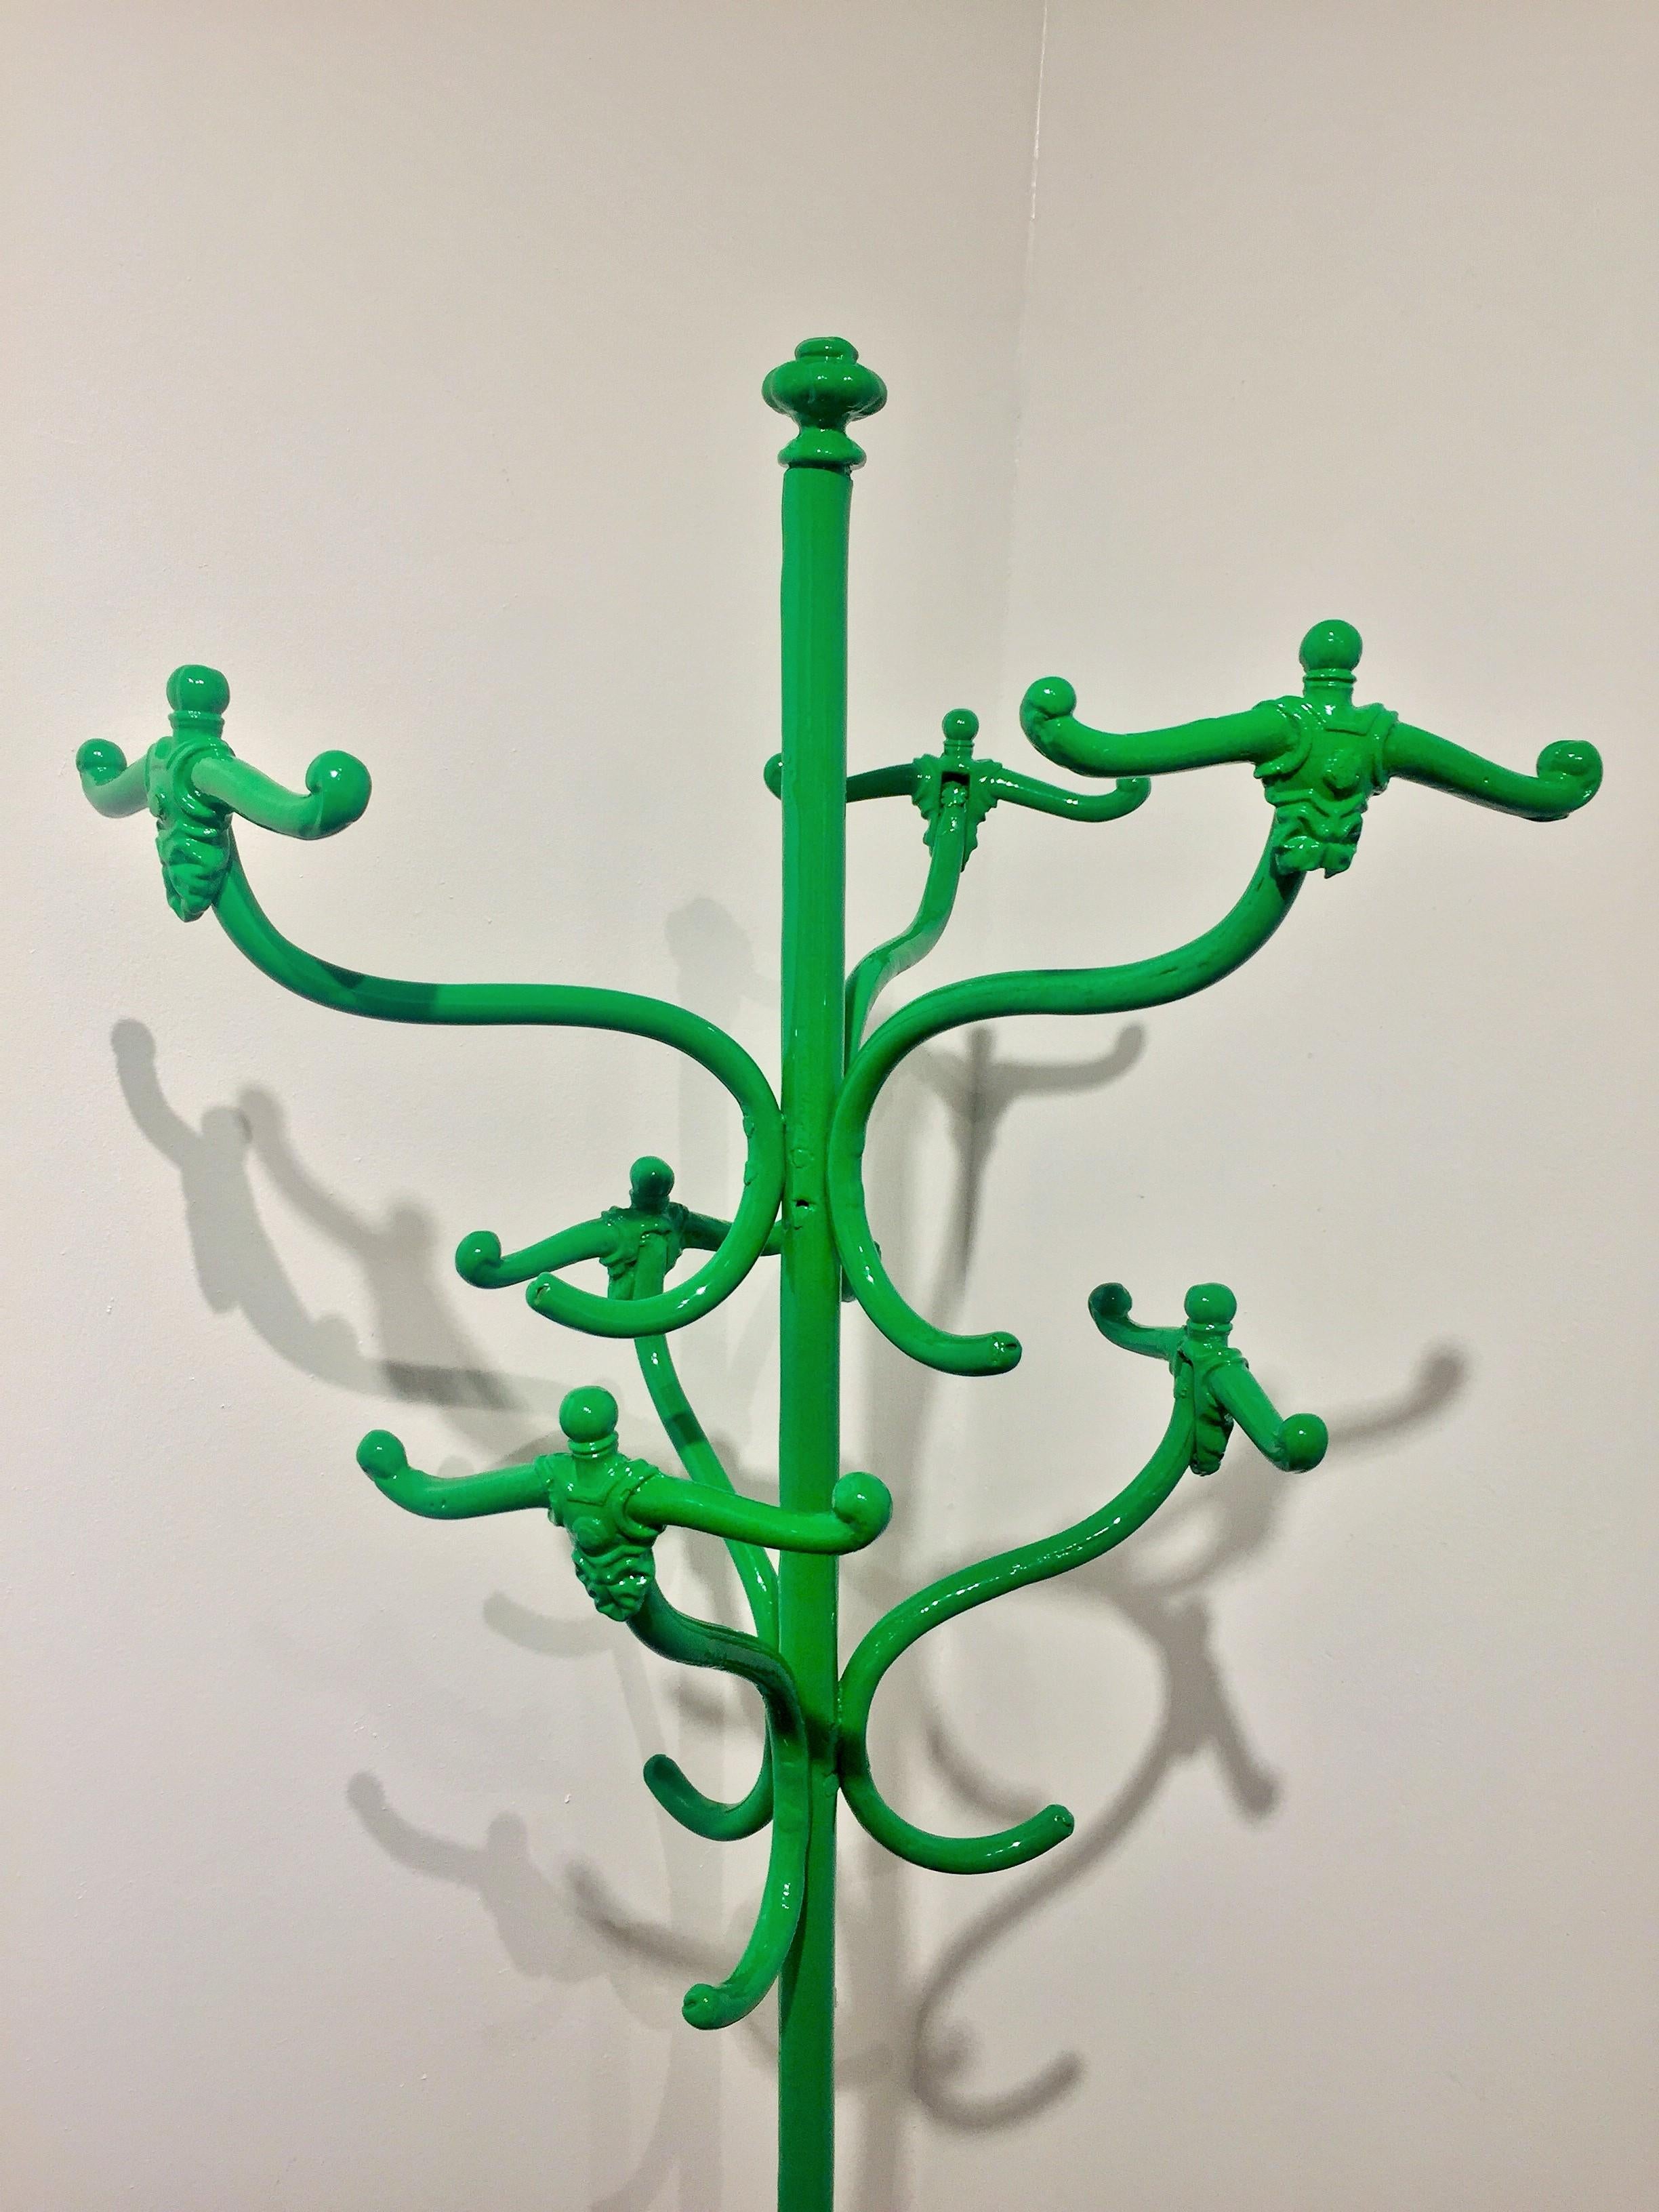 Vintage coat rack, powder coated in bright green. Six hooks resembling a swimmer prior to diving, make this a cheerful functional item. Though we also like it as an art piece. The coat rack shows minor wear throughout, with the most visible wear